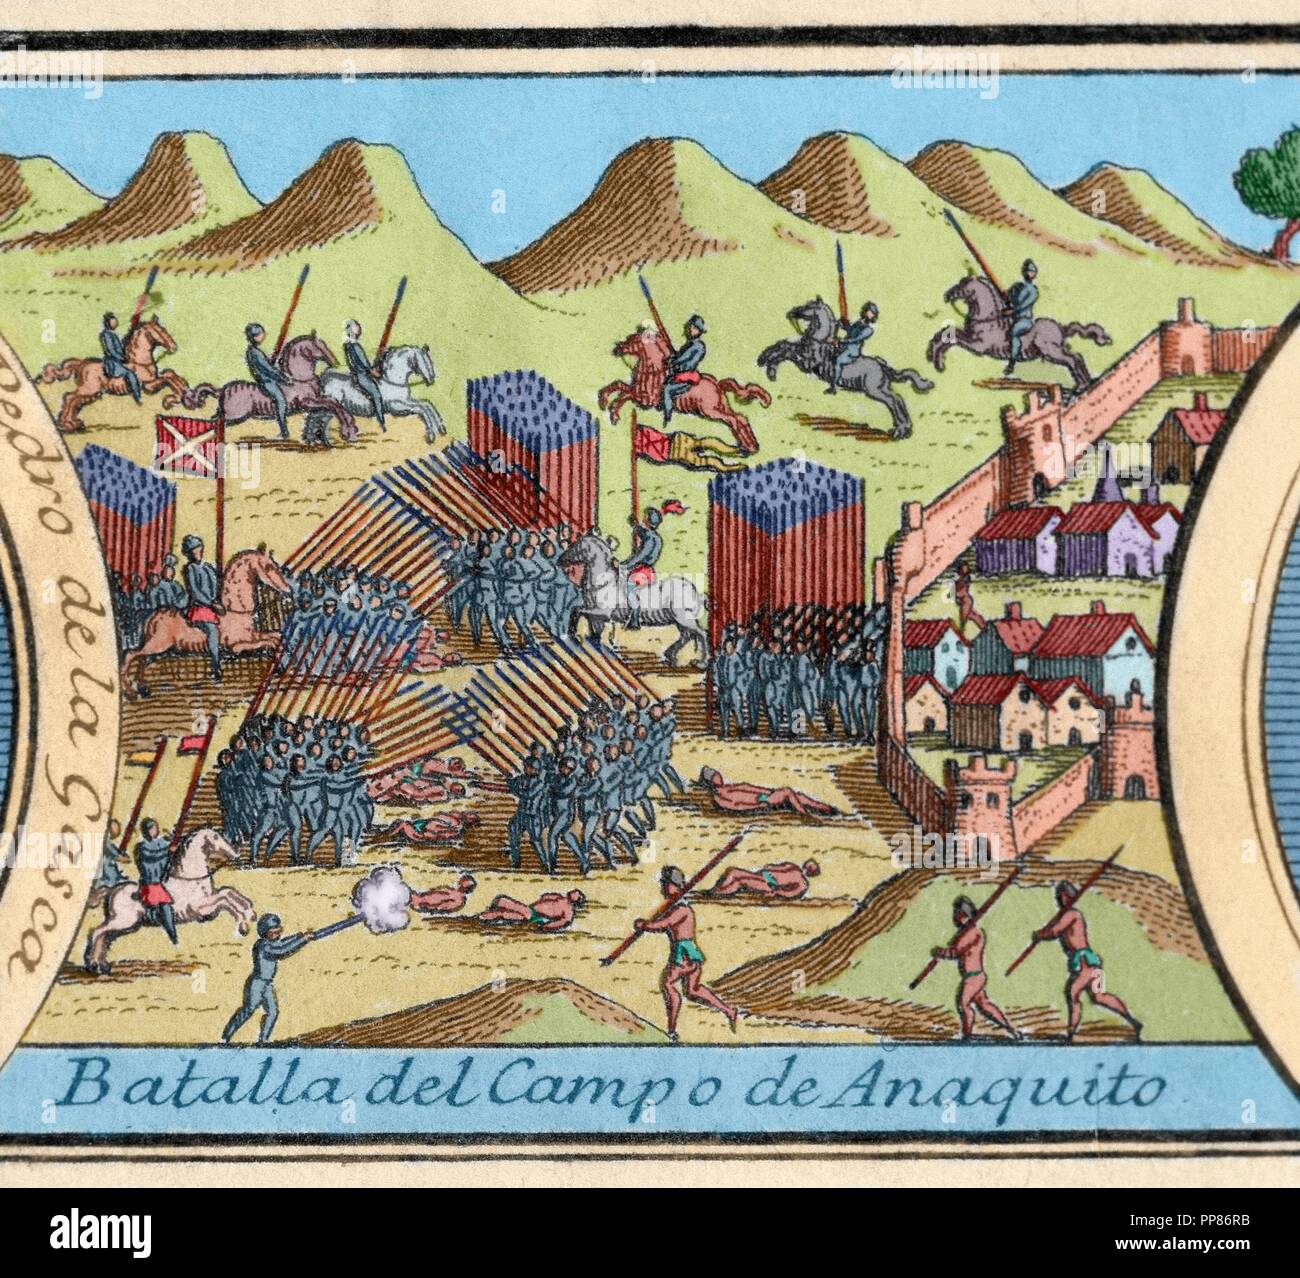 Spanish Conquest of Peru. Battle of Anaquito or Inaquito (1546), outskirts of present-day Quito, between Nueva Castilla and Viceroyalty of Peru leaded by Gonzalo Pizarro (1502-1548) and Blasco Nun ez Vela (d. 1546) with victory for Nueva Castilla. Engraving, 1726. Colored. Stock Photo